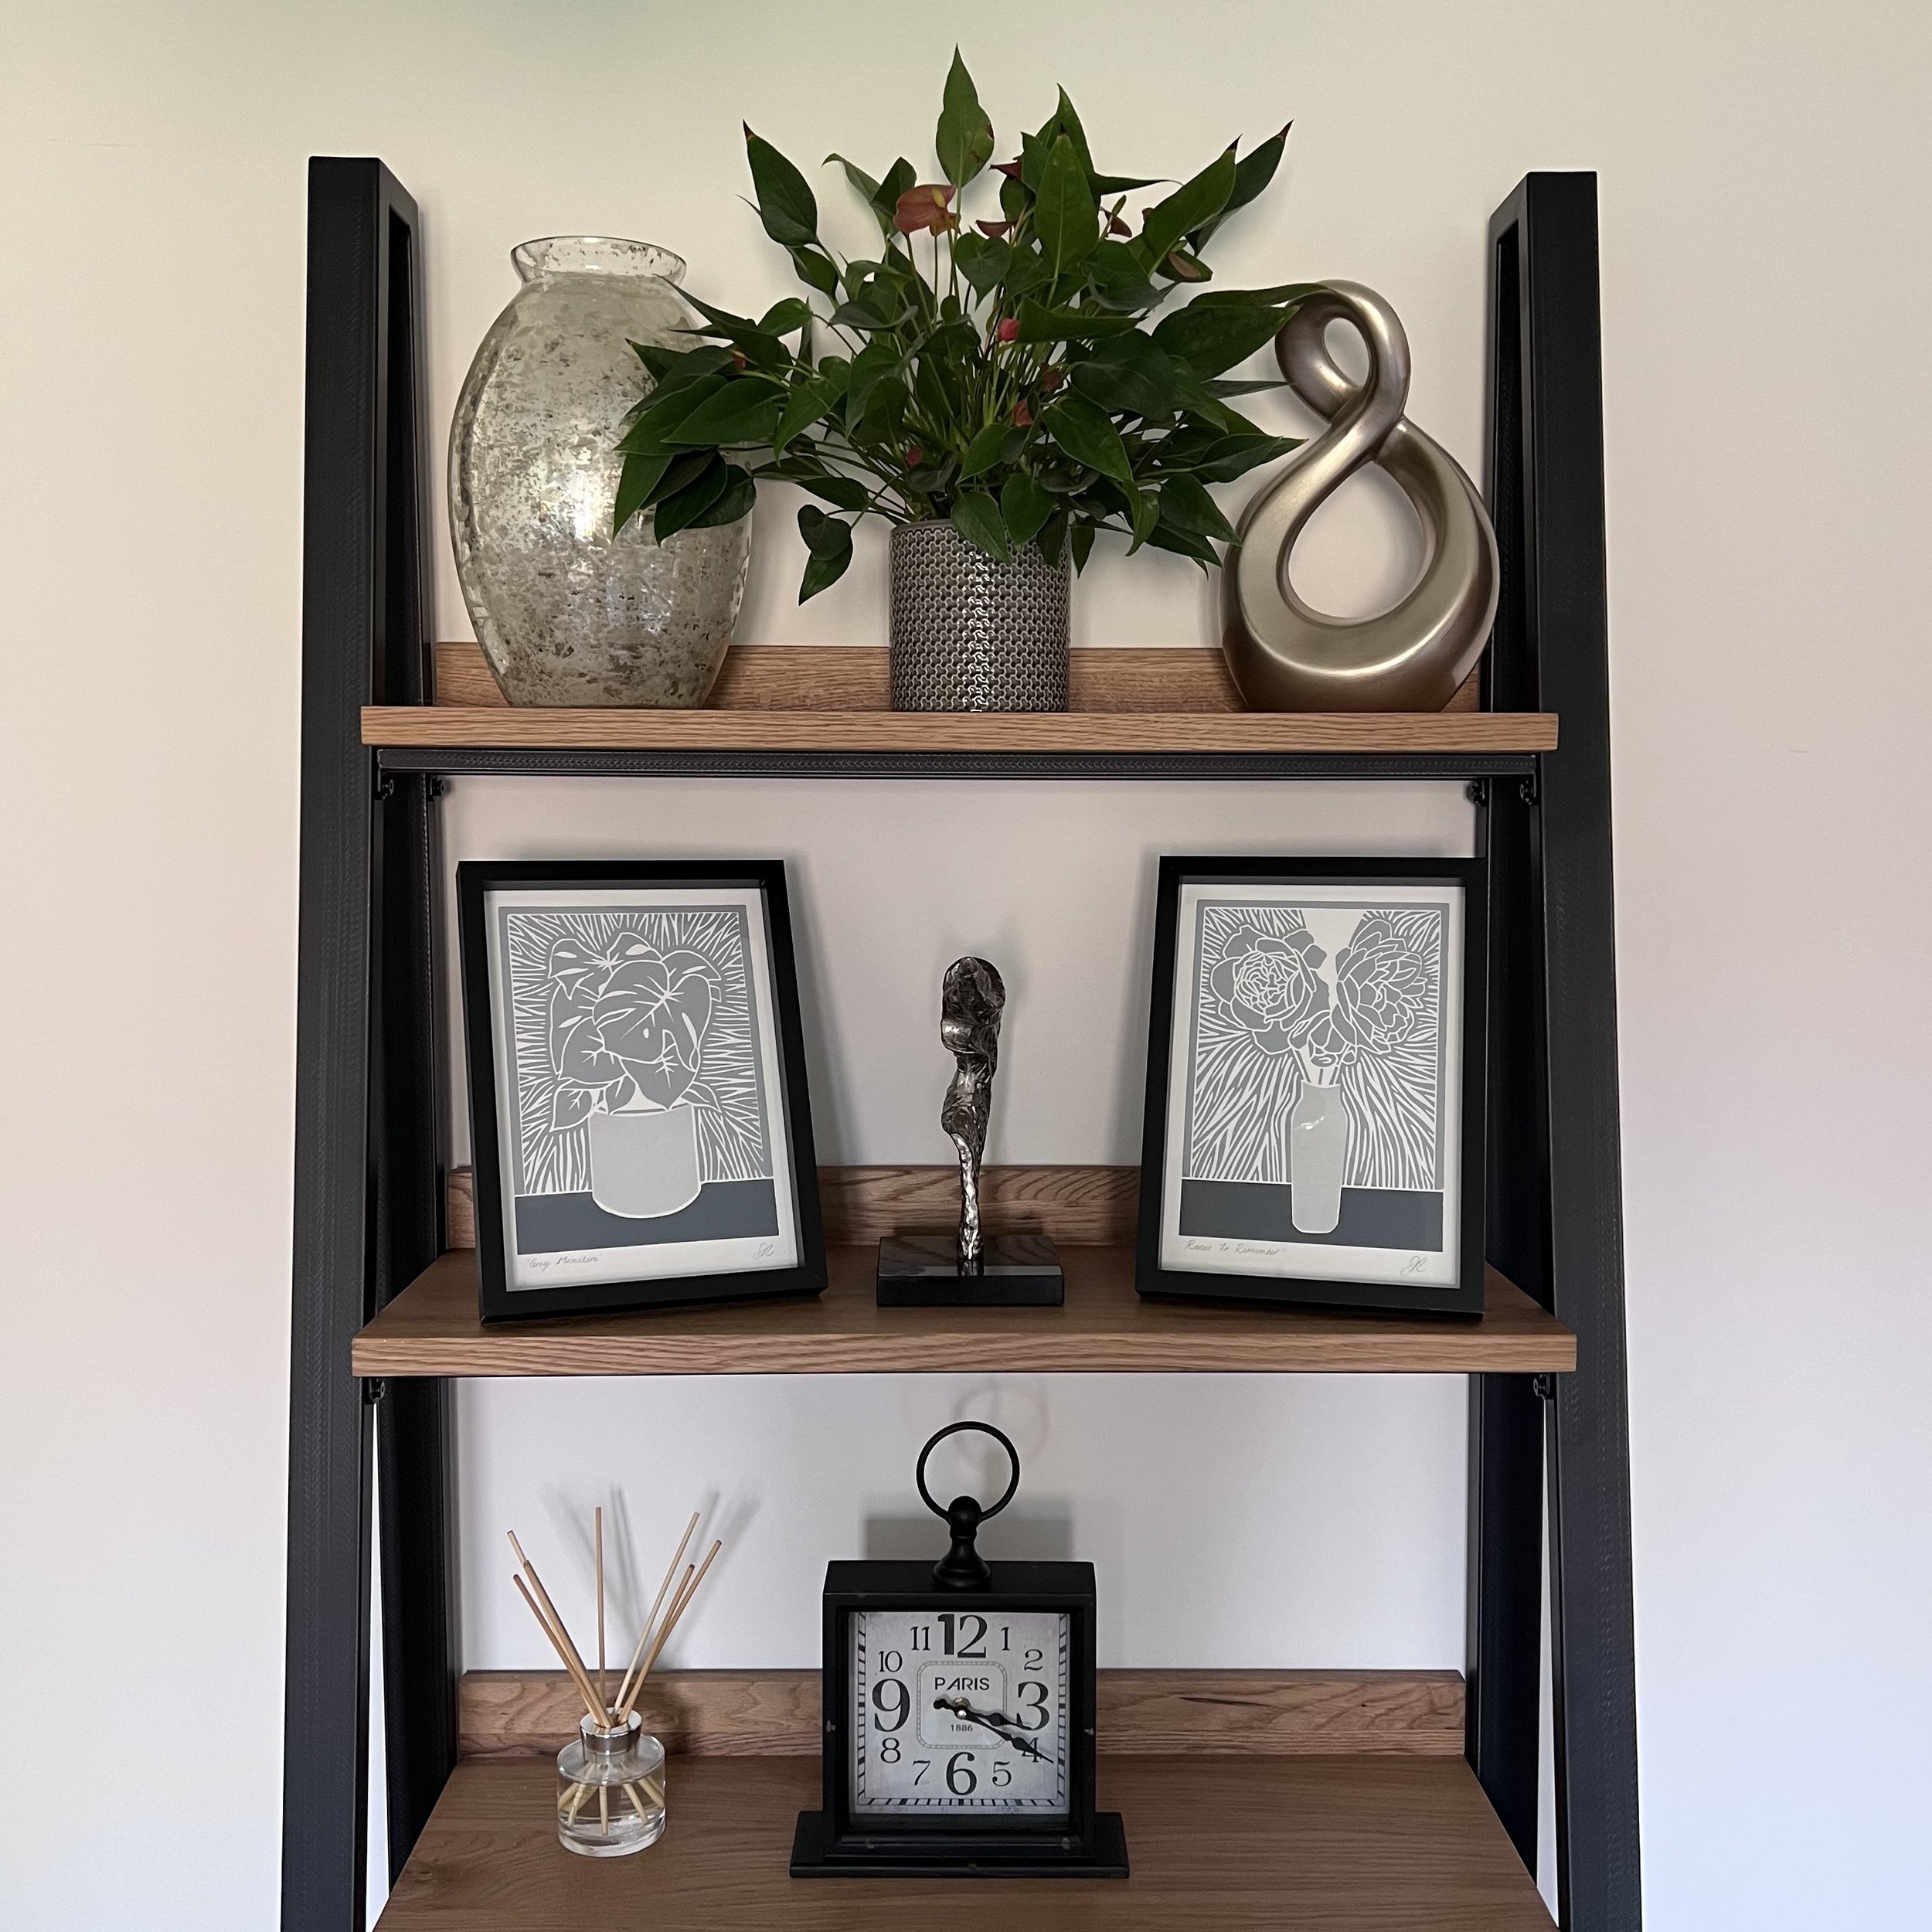 Artwork, plants and ornaments displayed on a wooden shelving unit